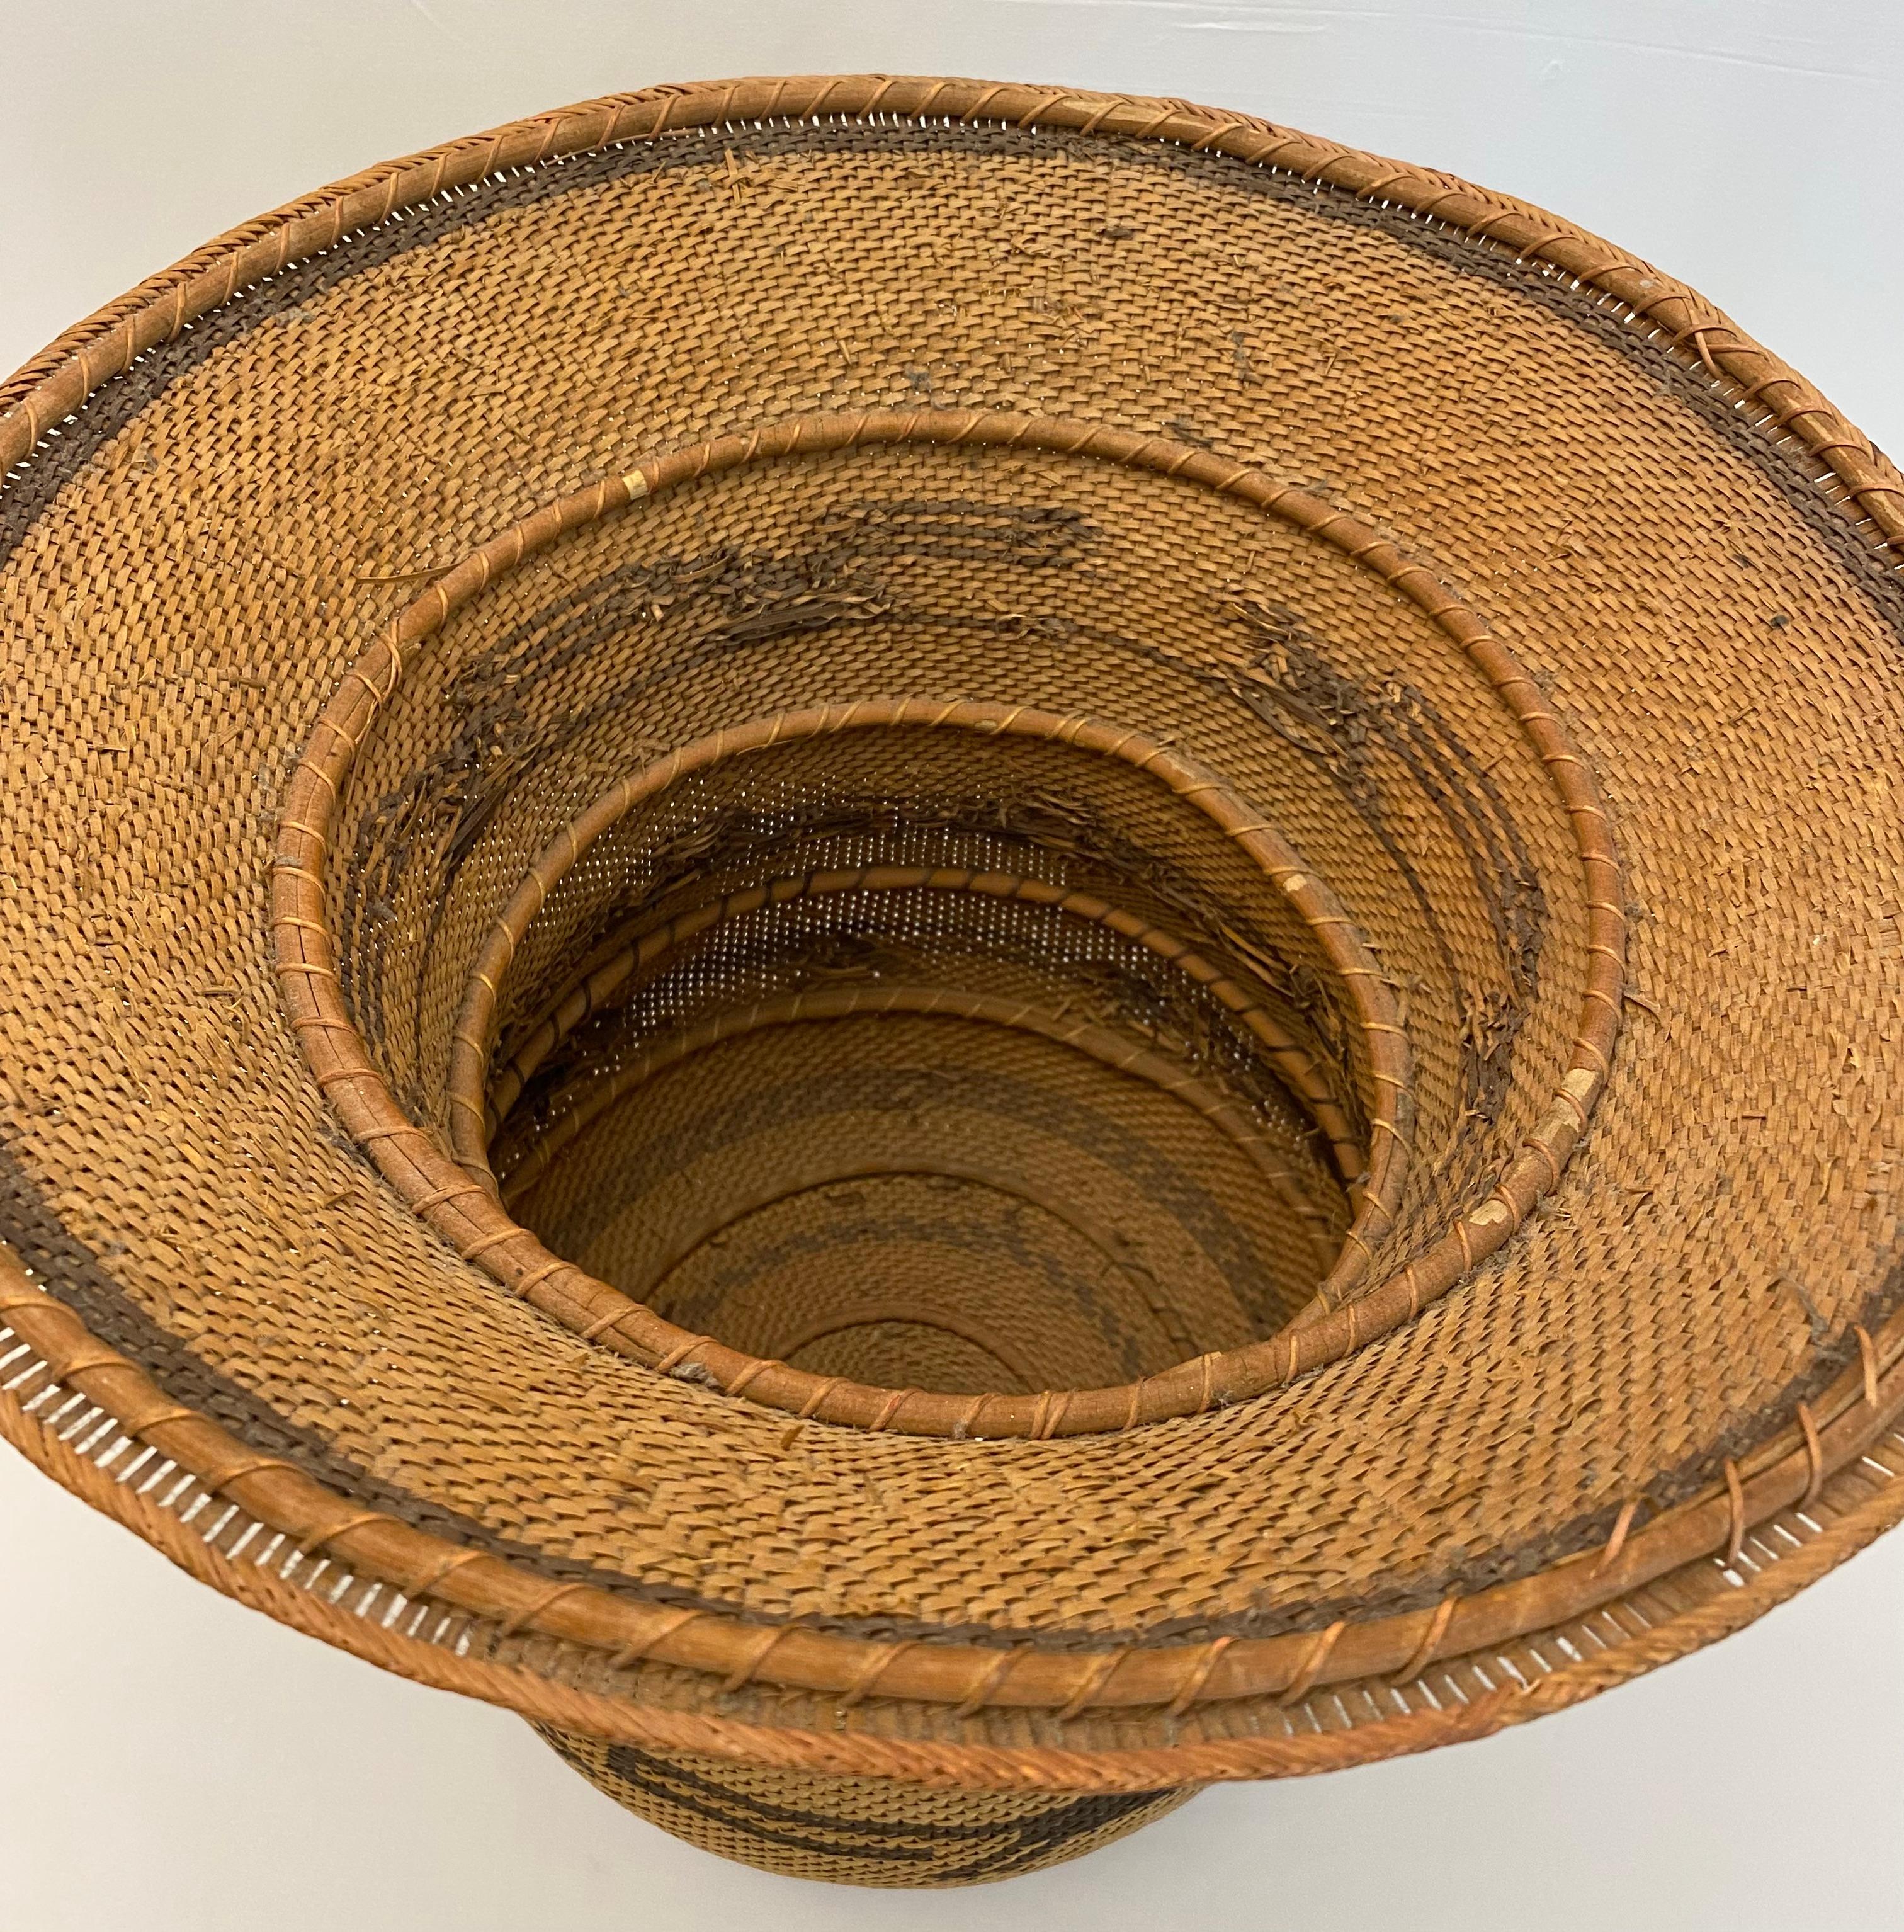 20th Century Hand Woven Basket by the Tribal People of the Amazon 